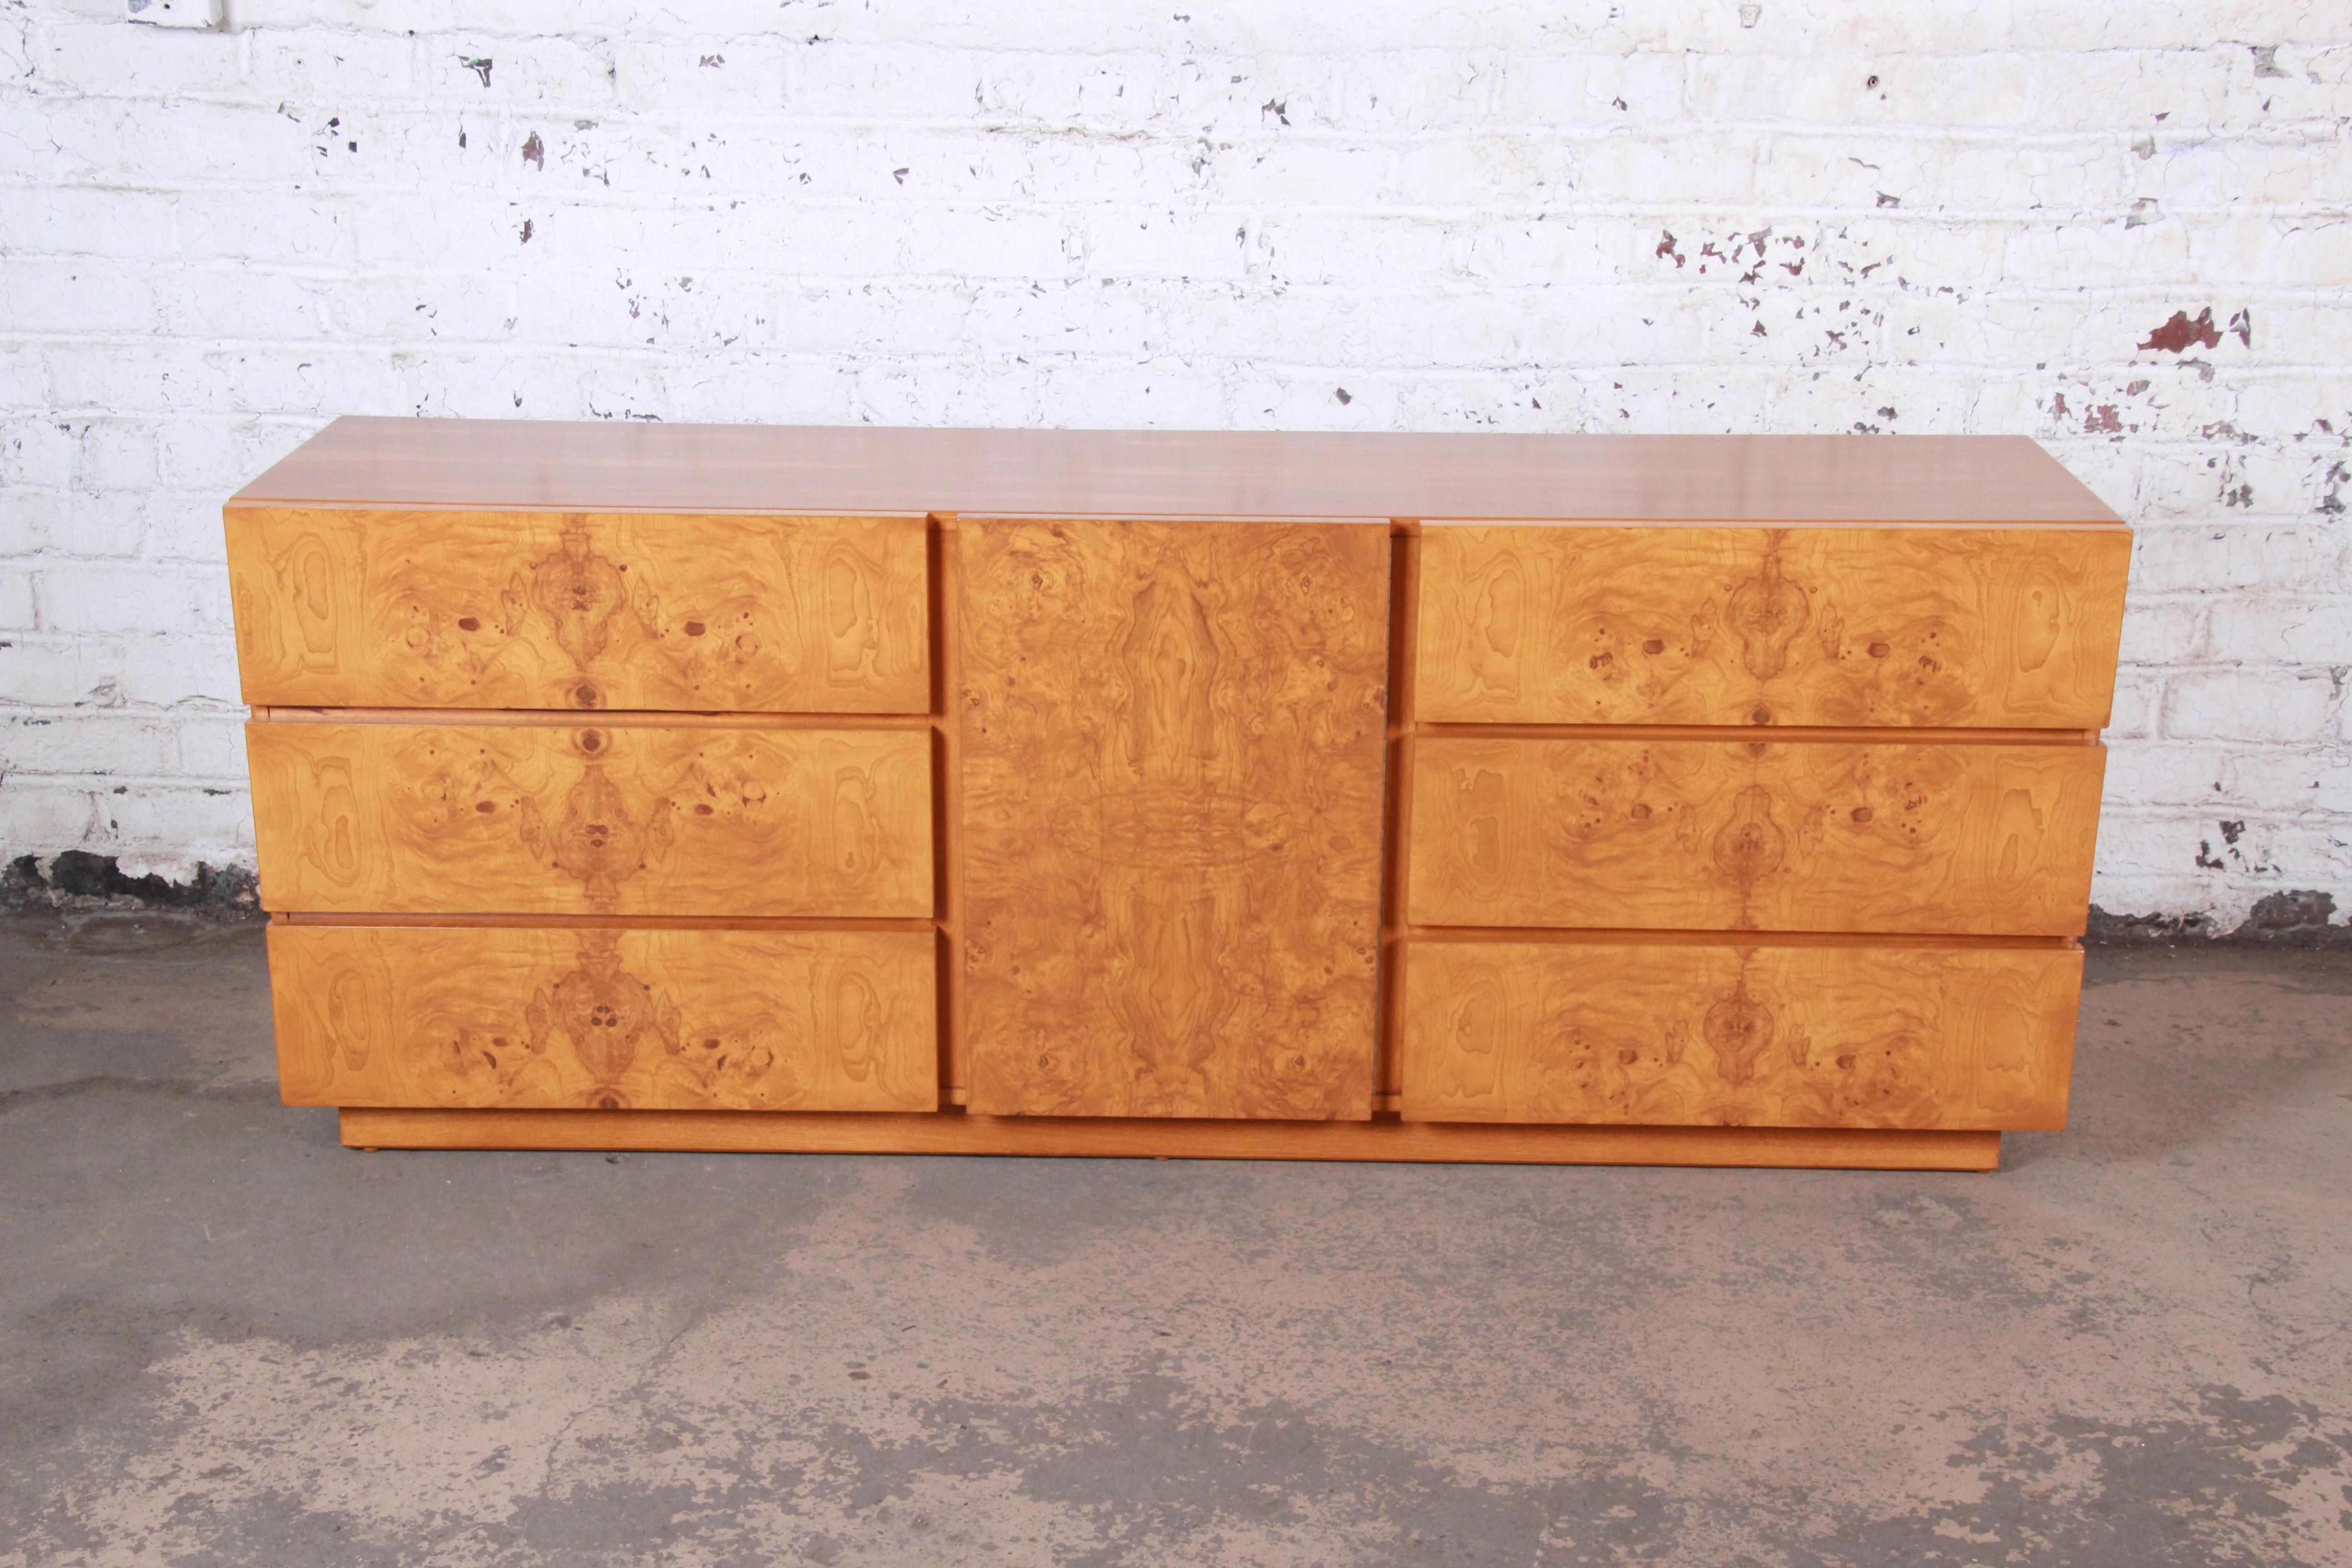 American Milo Baughman Style Burl Wood Long Dresser or Credenza by Lane, Newly Restored